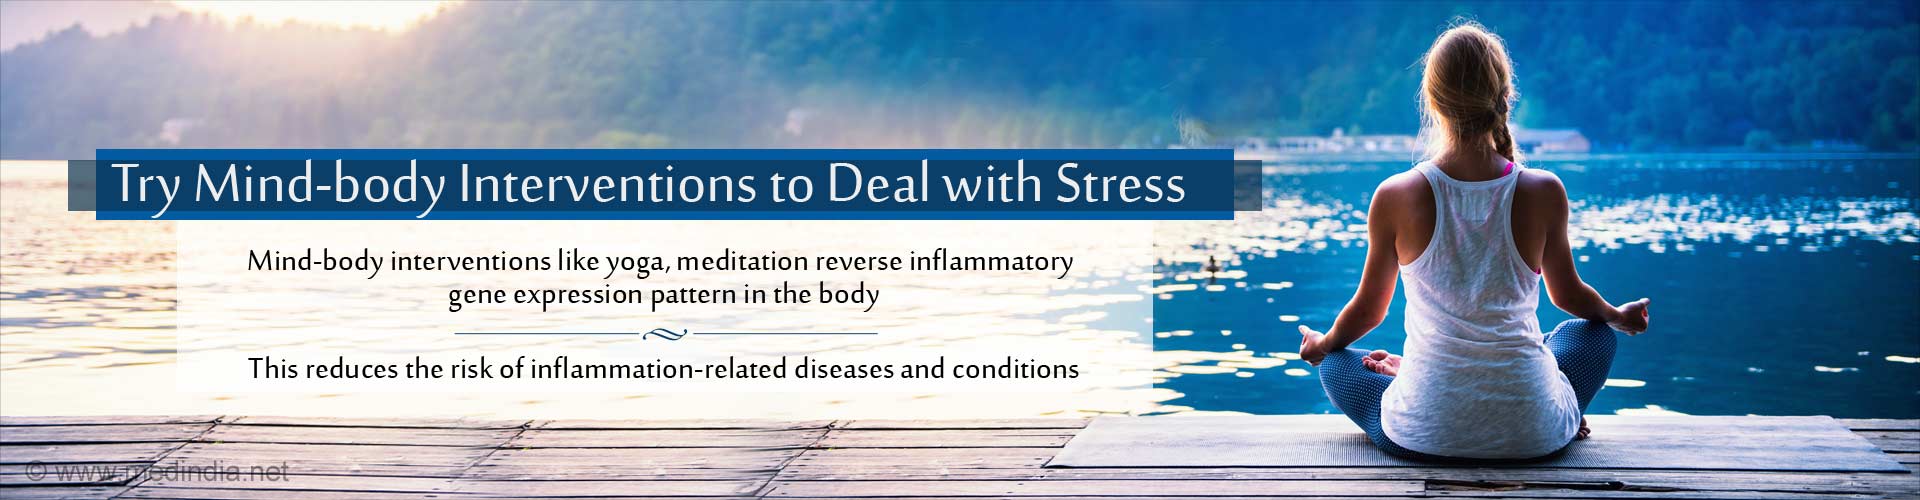 Try Mind-body Interventions to Deal with Stress
- Mind-body interventions like yoga, meditation reverse inflammatory gene expression pattern in the body
- This reduces the risk of inflammation-related diseases and conditions